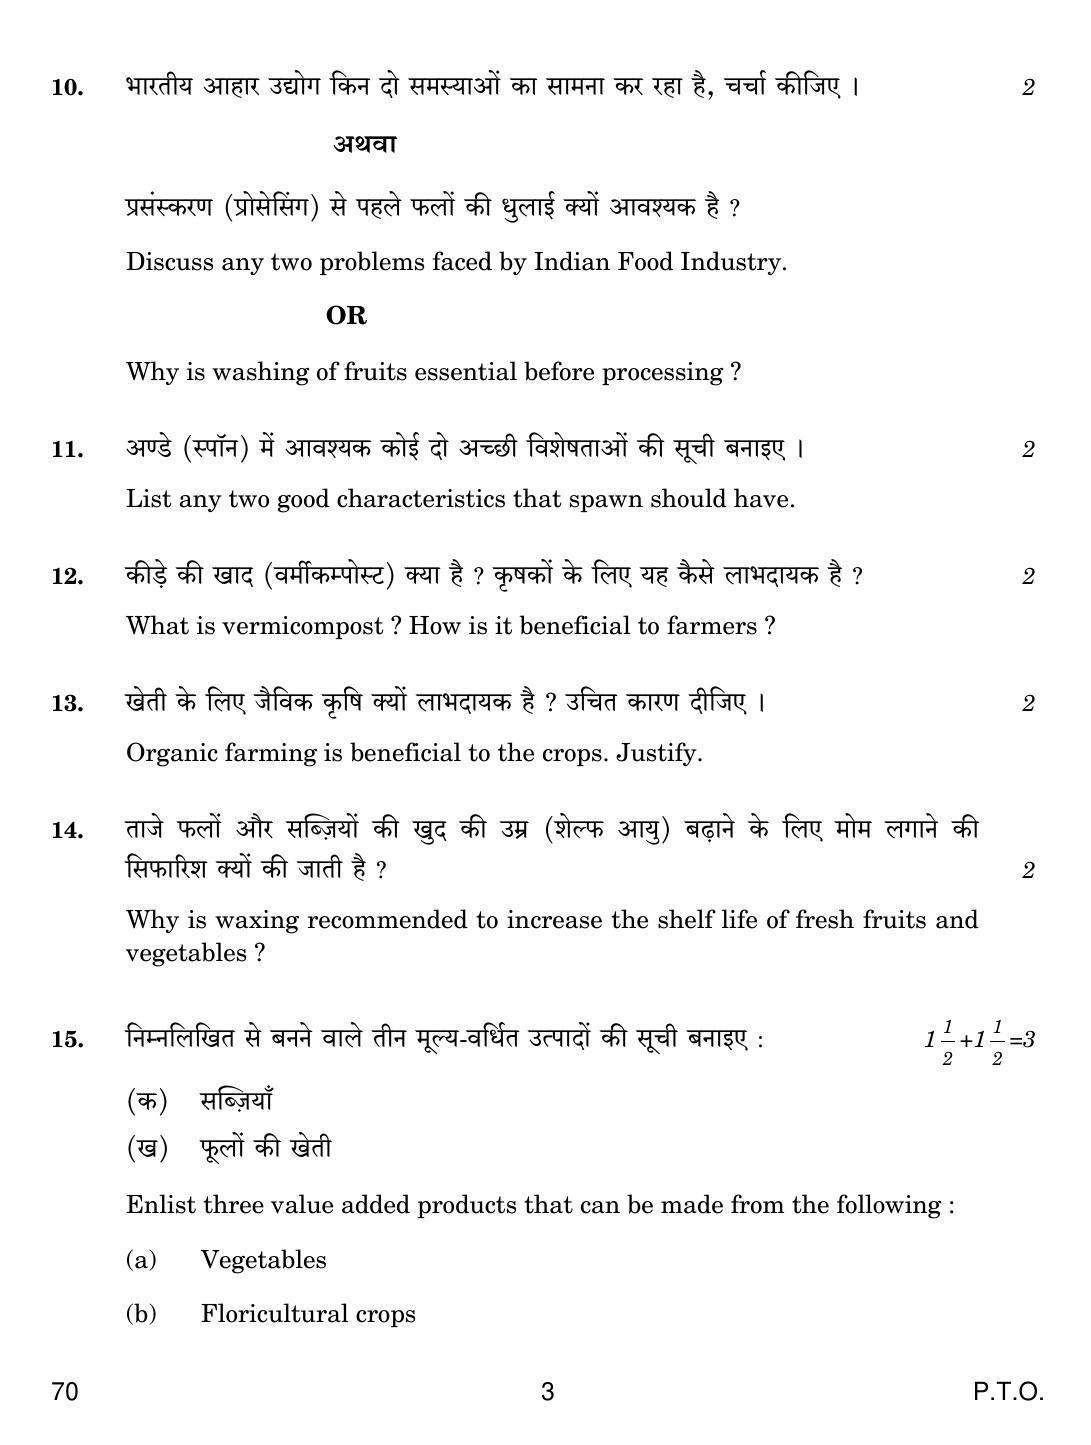 CBSE Class 12 70 Agriculture 2019 Question Paper - Page 3